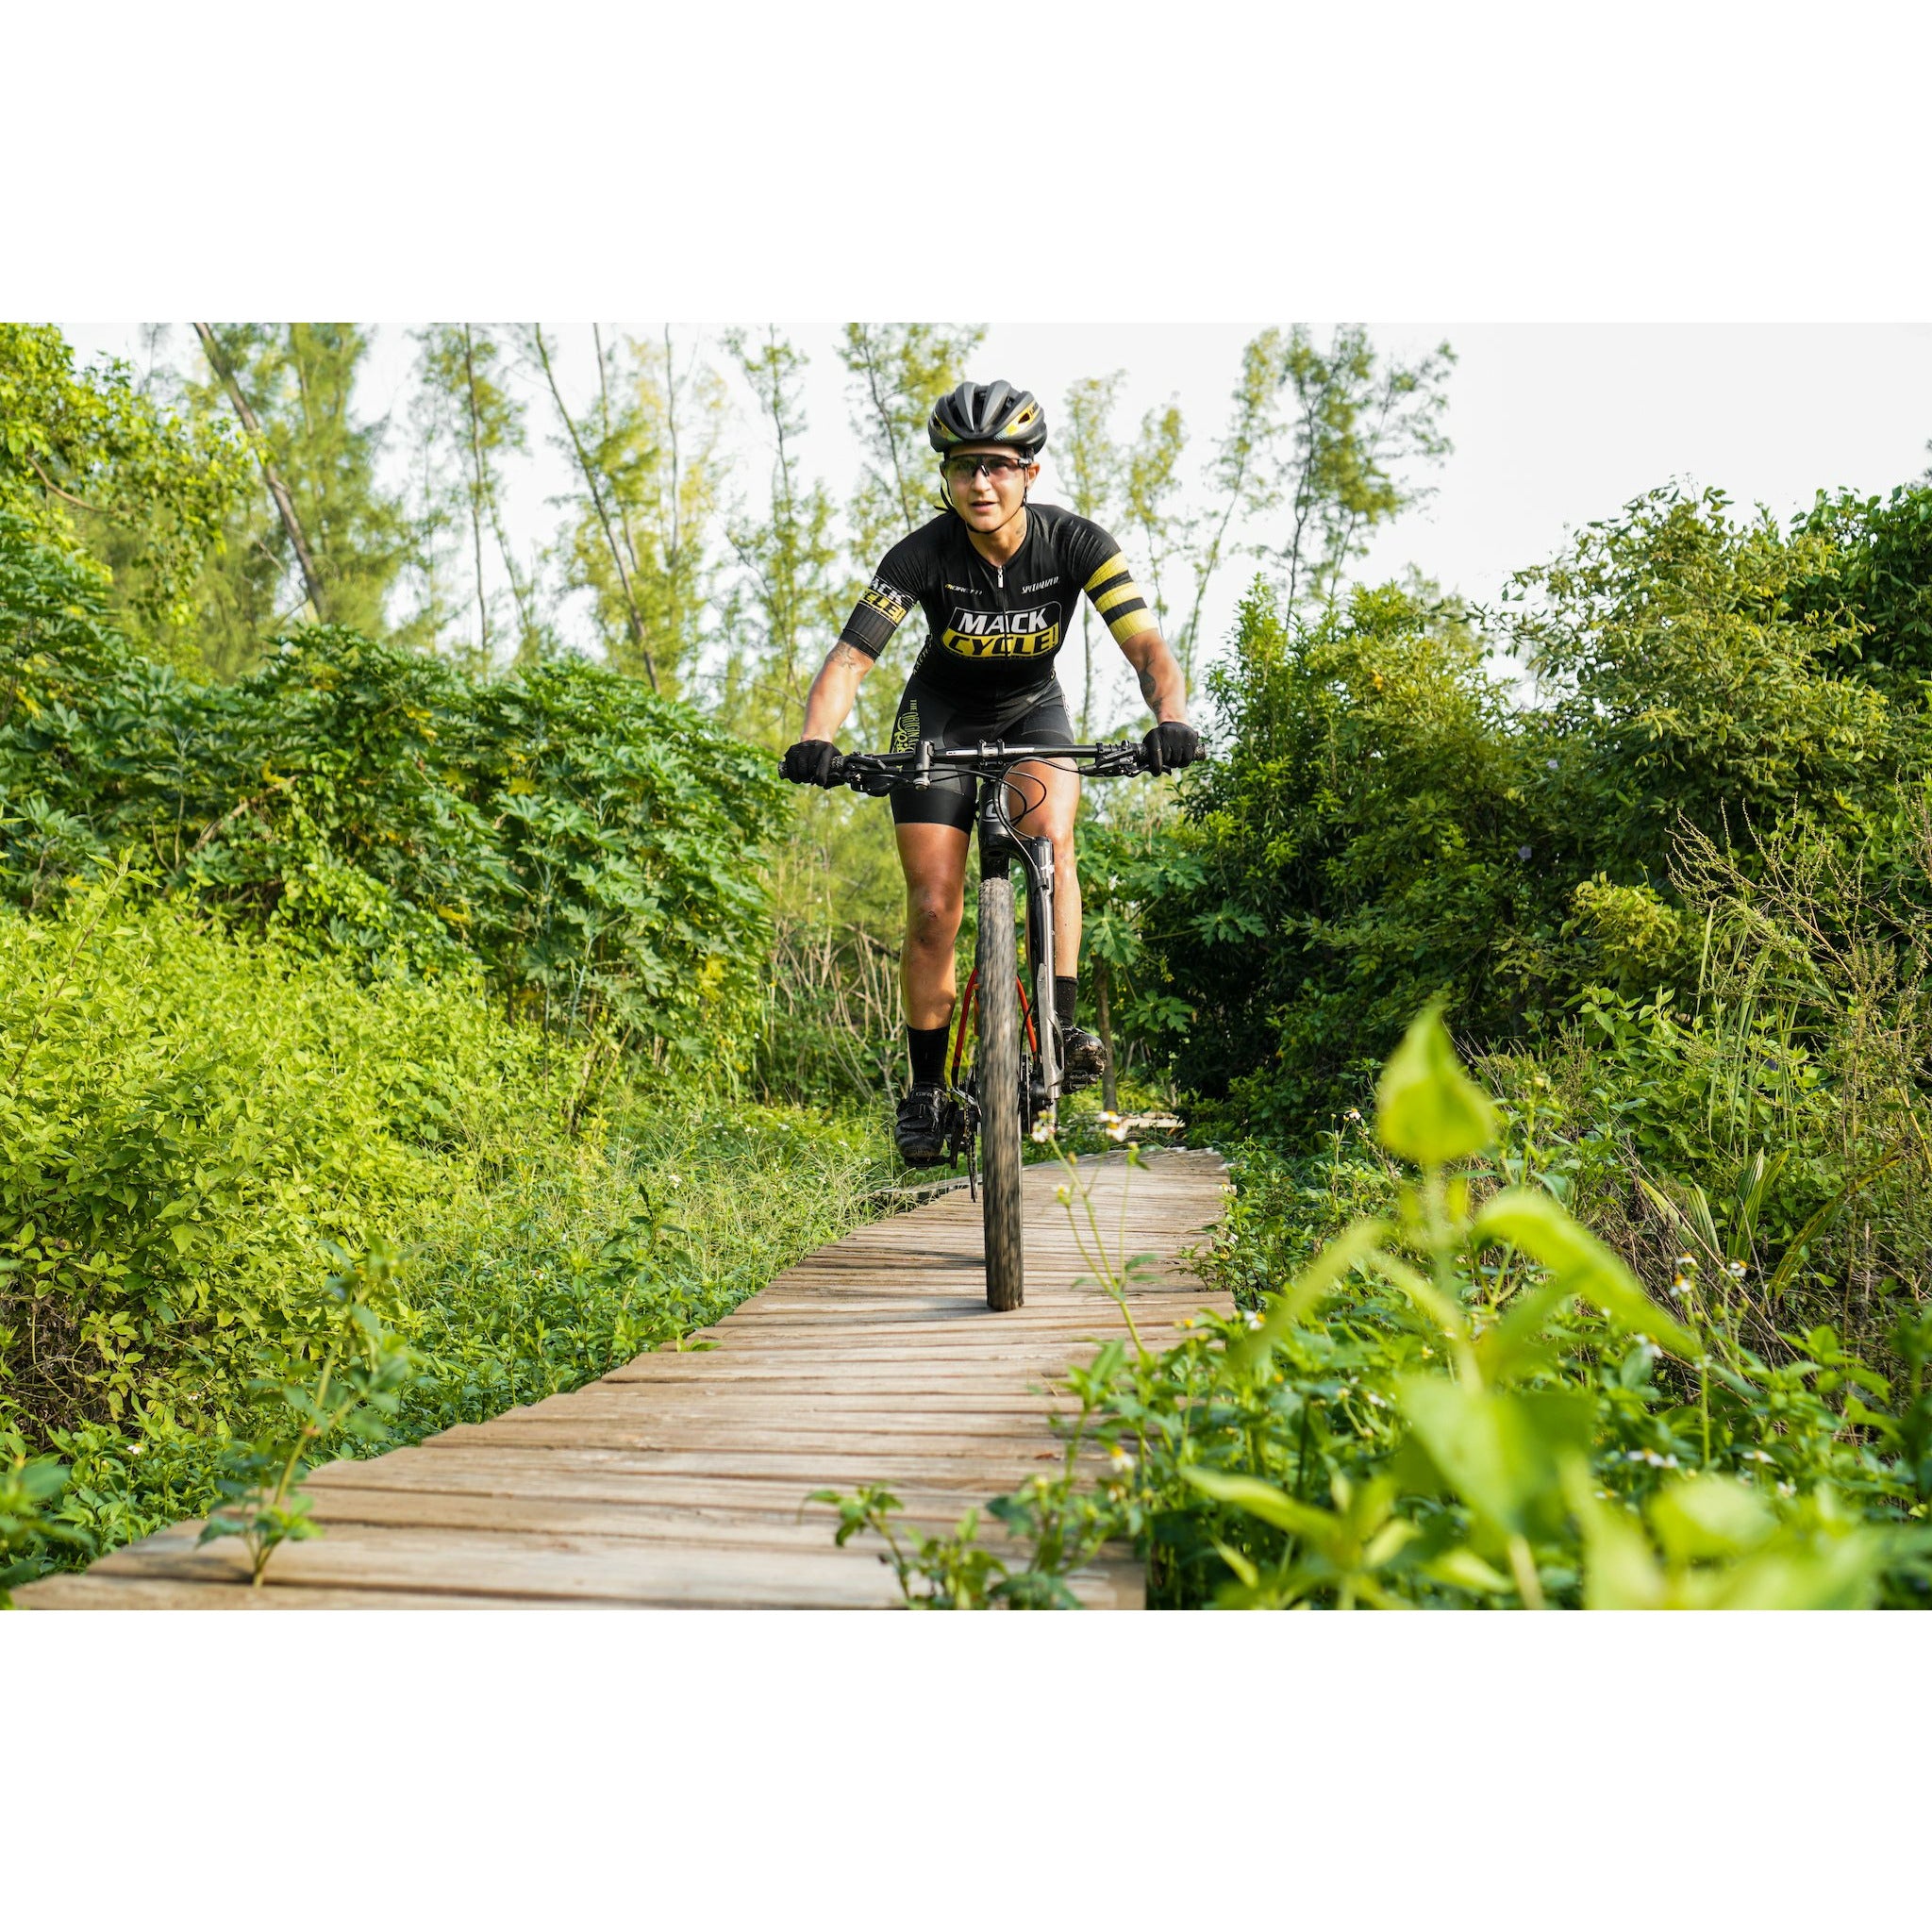 Bavie Grafals Riding her Cannondale F-Si Carbon 2 at the Virginia Key Mountain Bike Trails in Miami